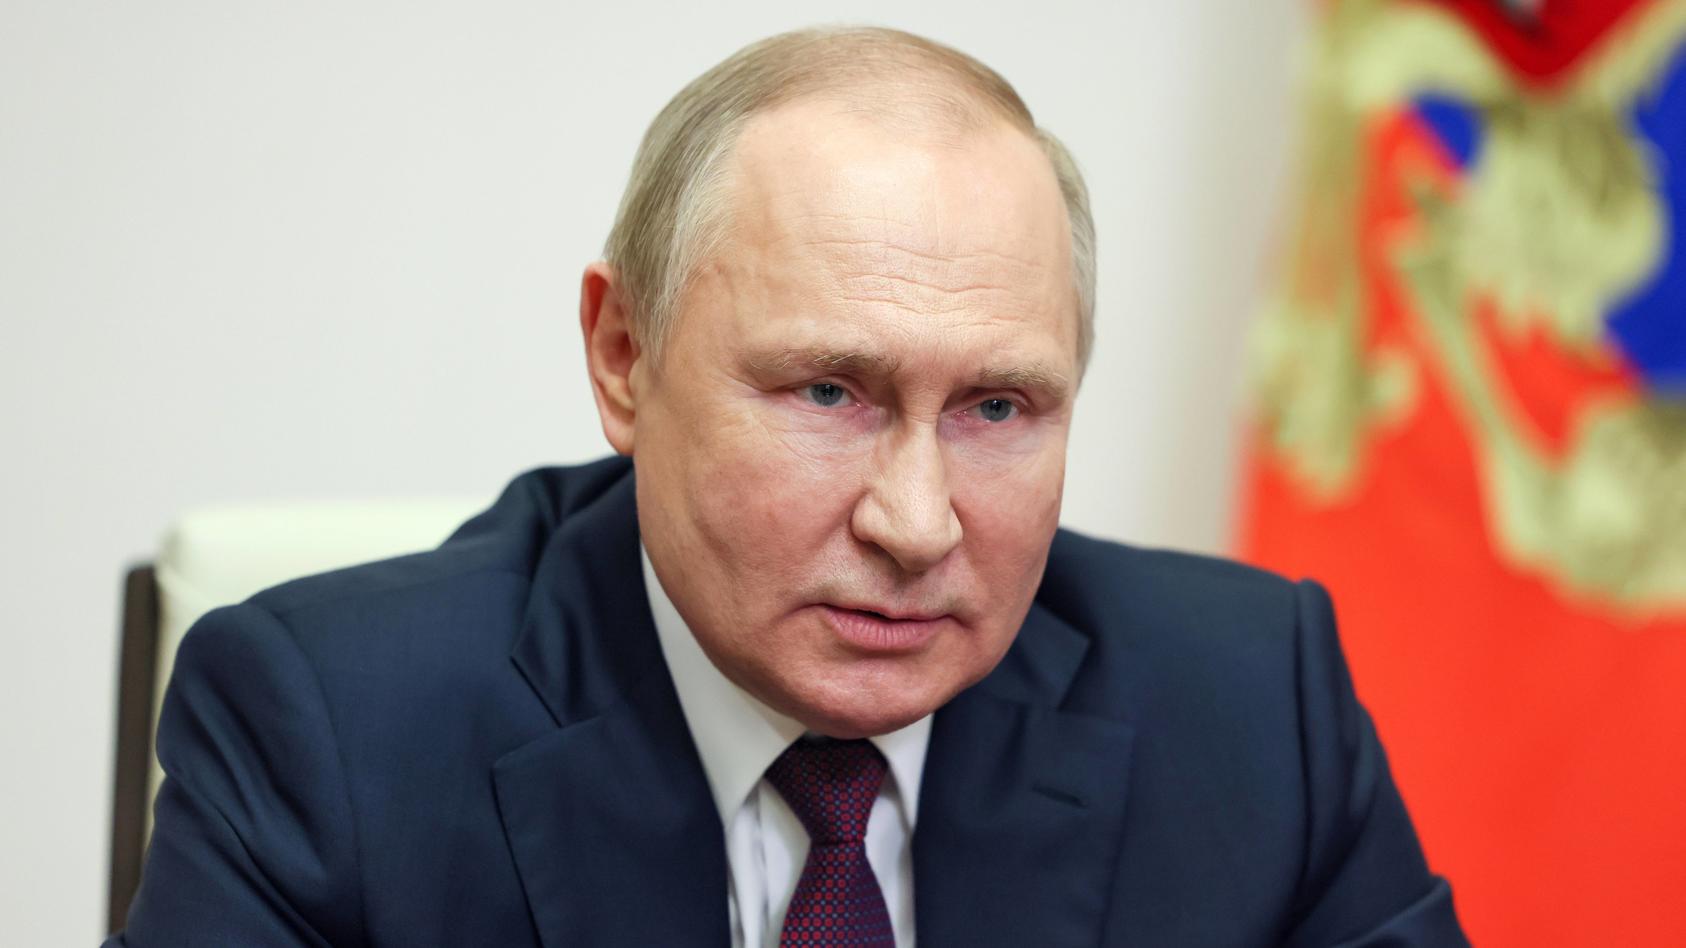  Russia Putin 8205863 01.06.2022 Russian President Vladimir Putin delivers an address to the participants of the Bolshaya Peremena All-Russian contest for school students via teleconference call at Novo-Ogaryovo state residence, outside Moscow, Russi